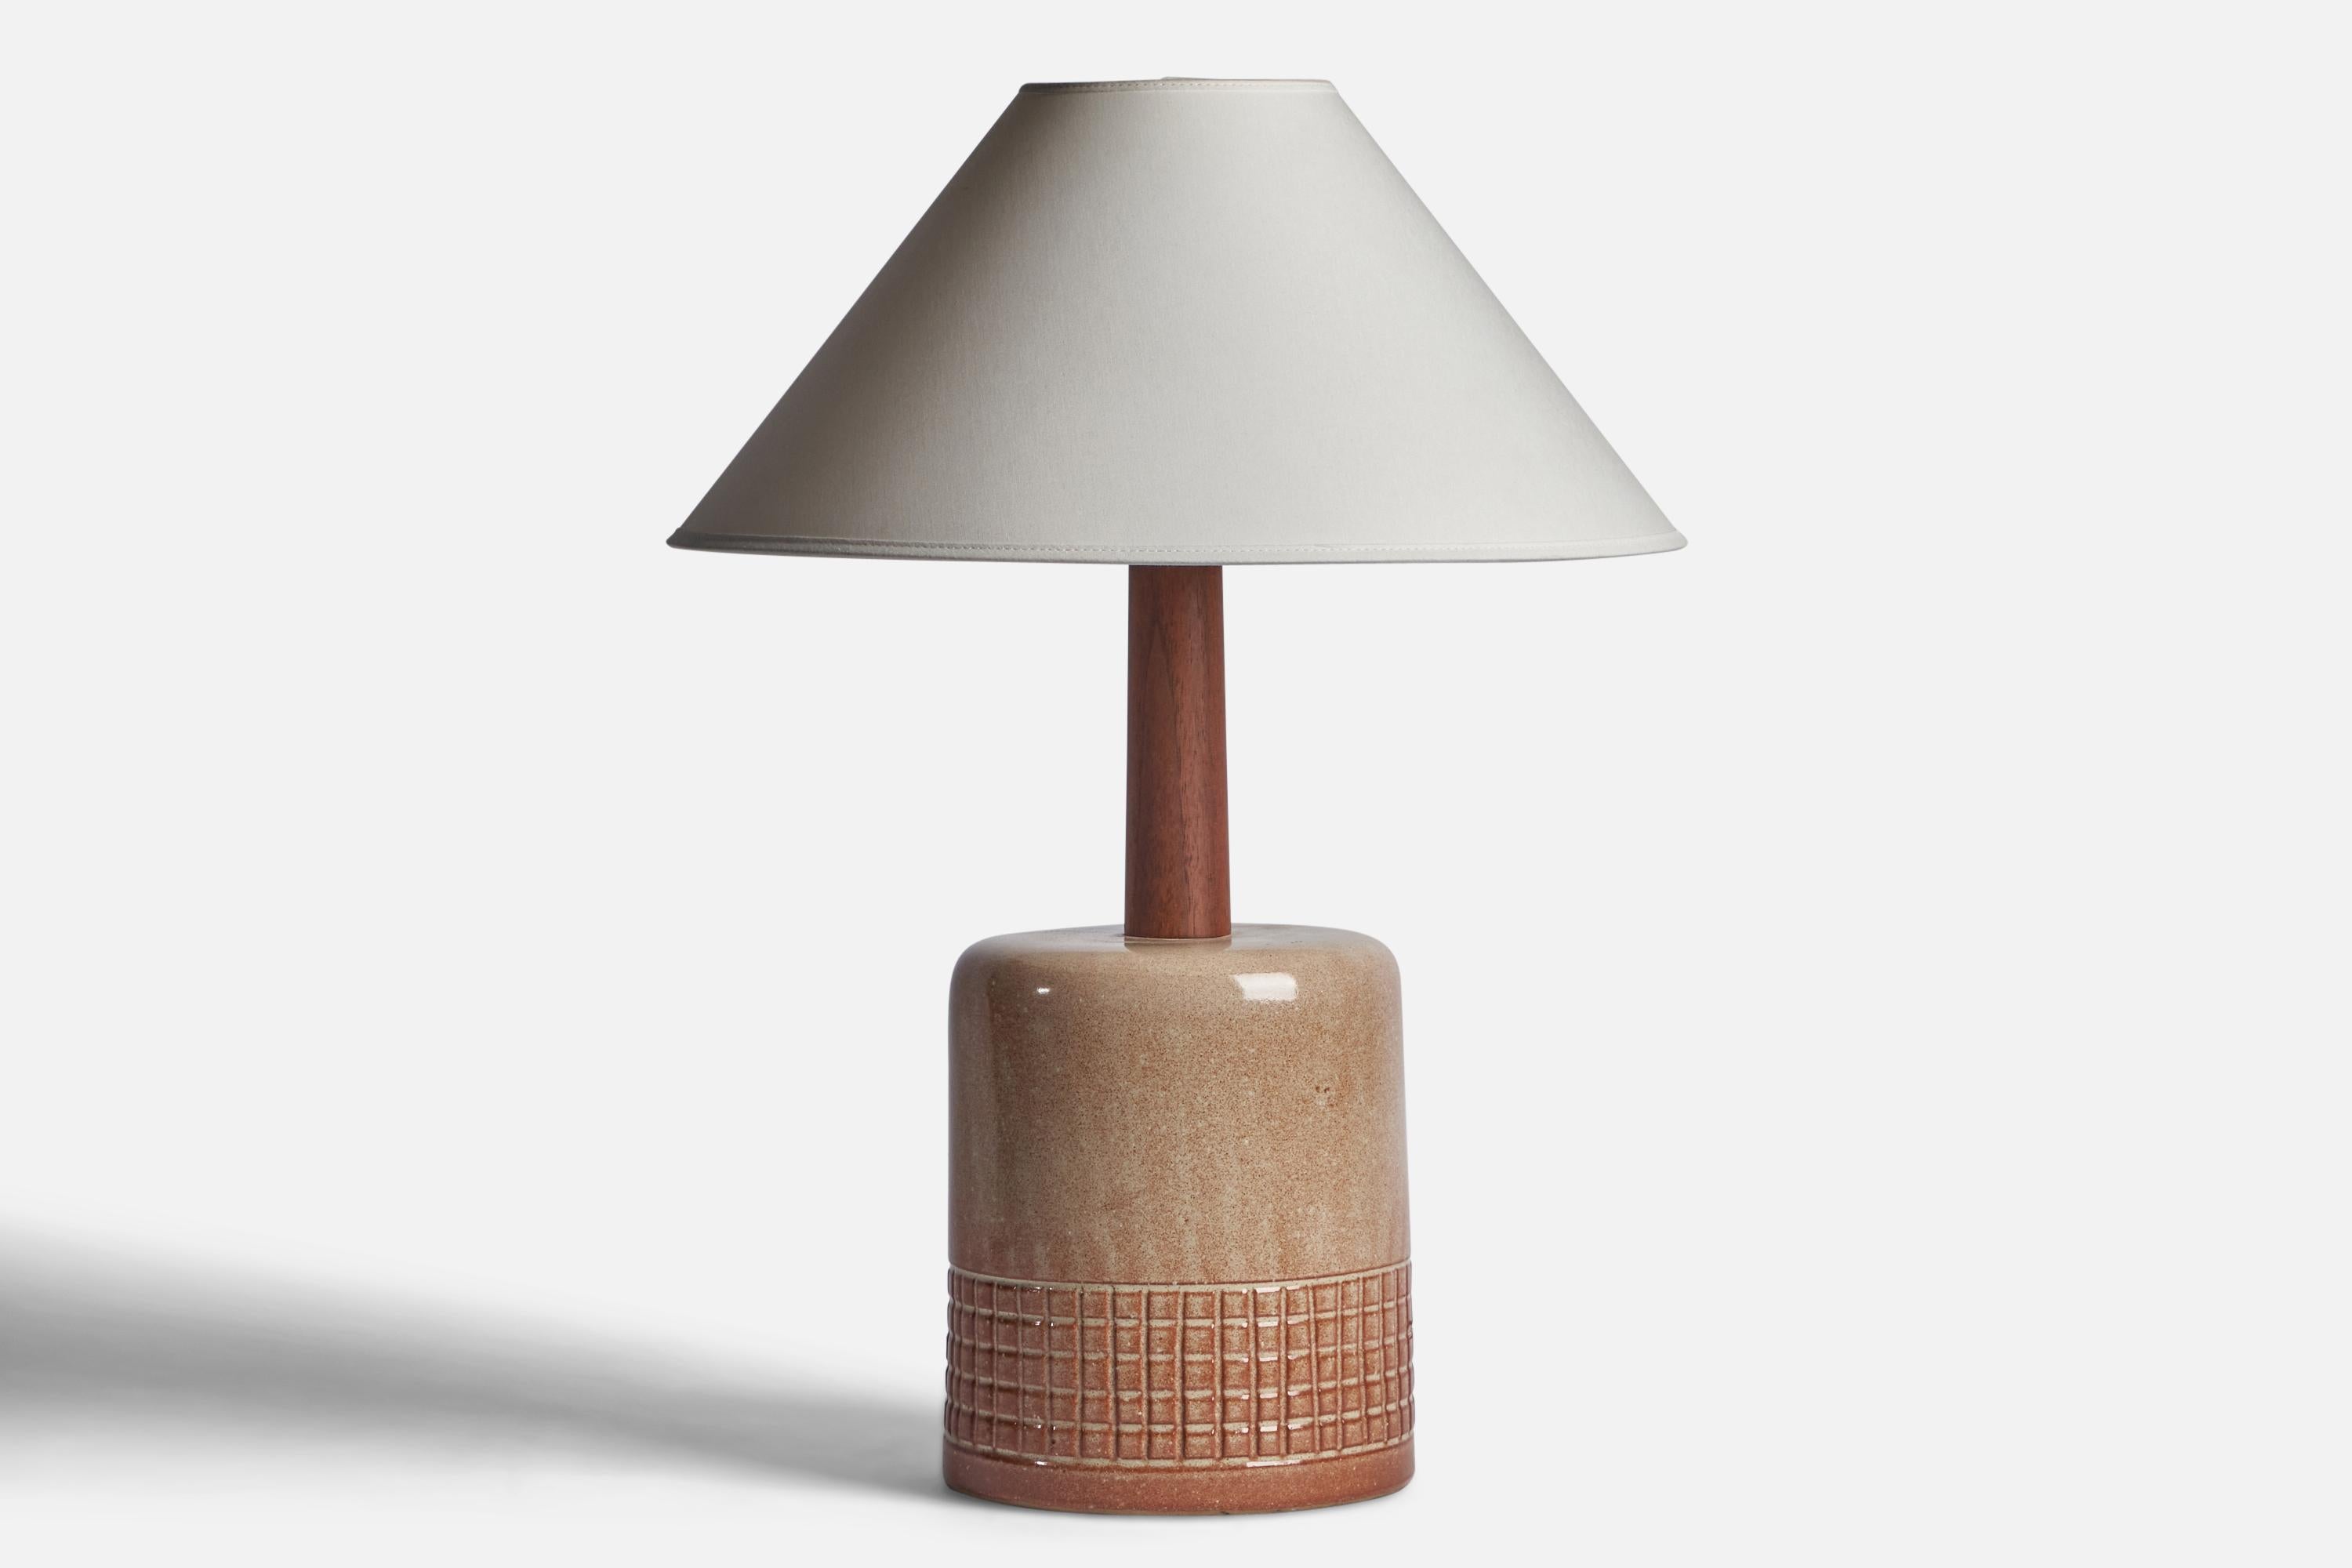 An beige-glazed ceramic and walnut table lamp designed by Jane & Gordon Martz and produced by Marshall Studios, USA, 1960s.

Dimensions of Lamp (inches): 17.5” H x 7.45” Diameter

Dimensions of Shade (inches): 4.5” Top Diameter x 16” Bottom Diameter